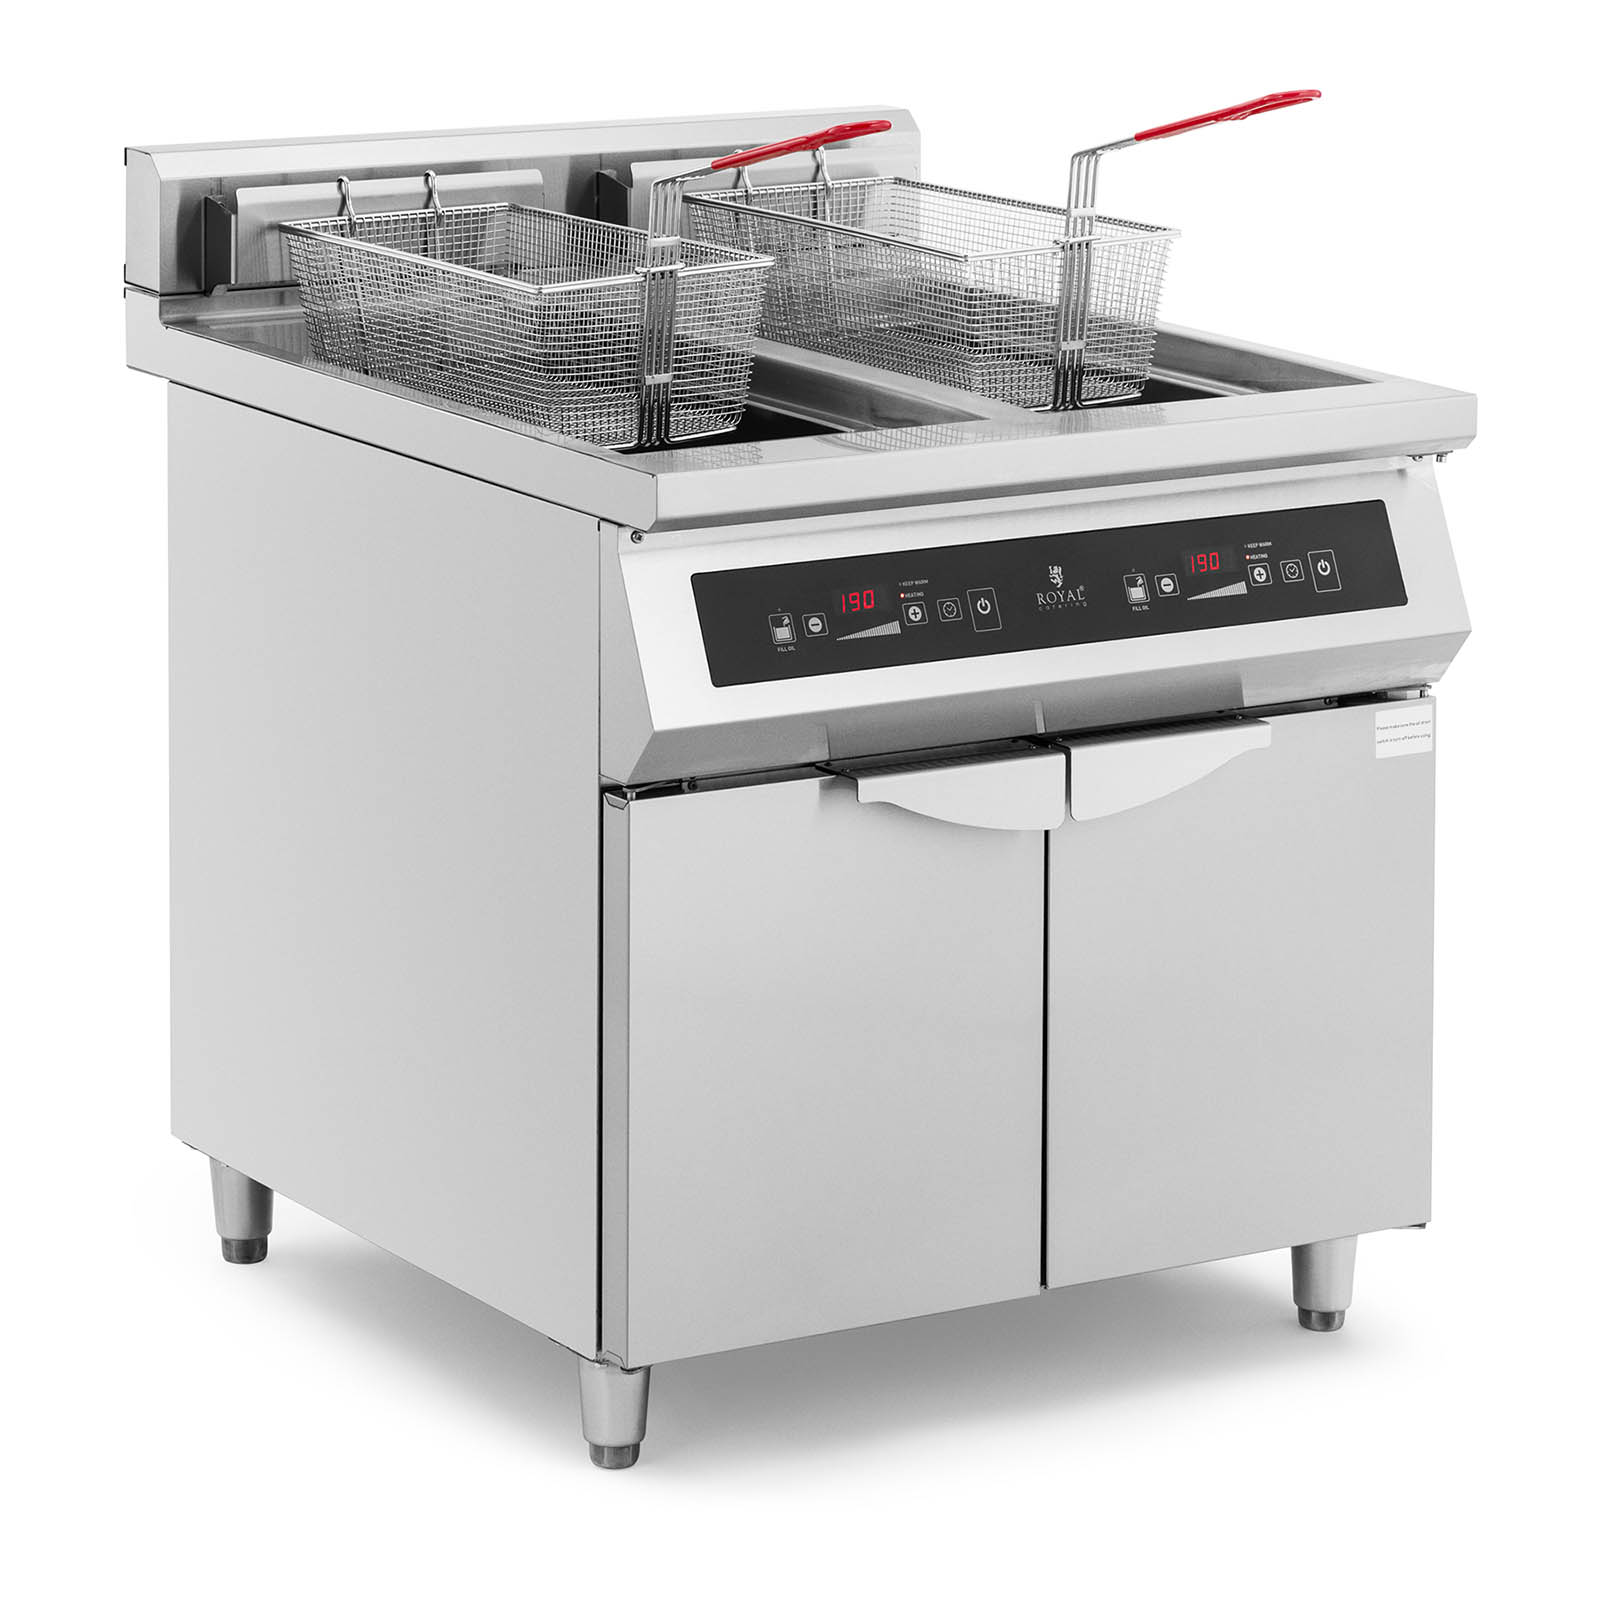 Inductiefriteuse - 2 x 30 L - 60 tot 190 °C - Royal Catering